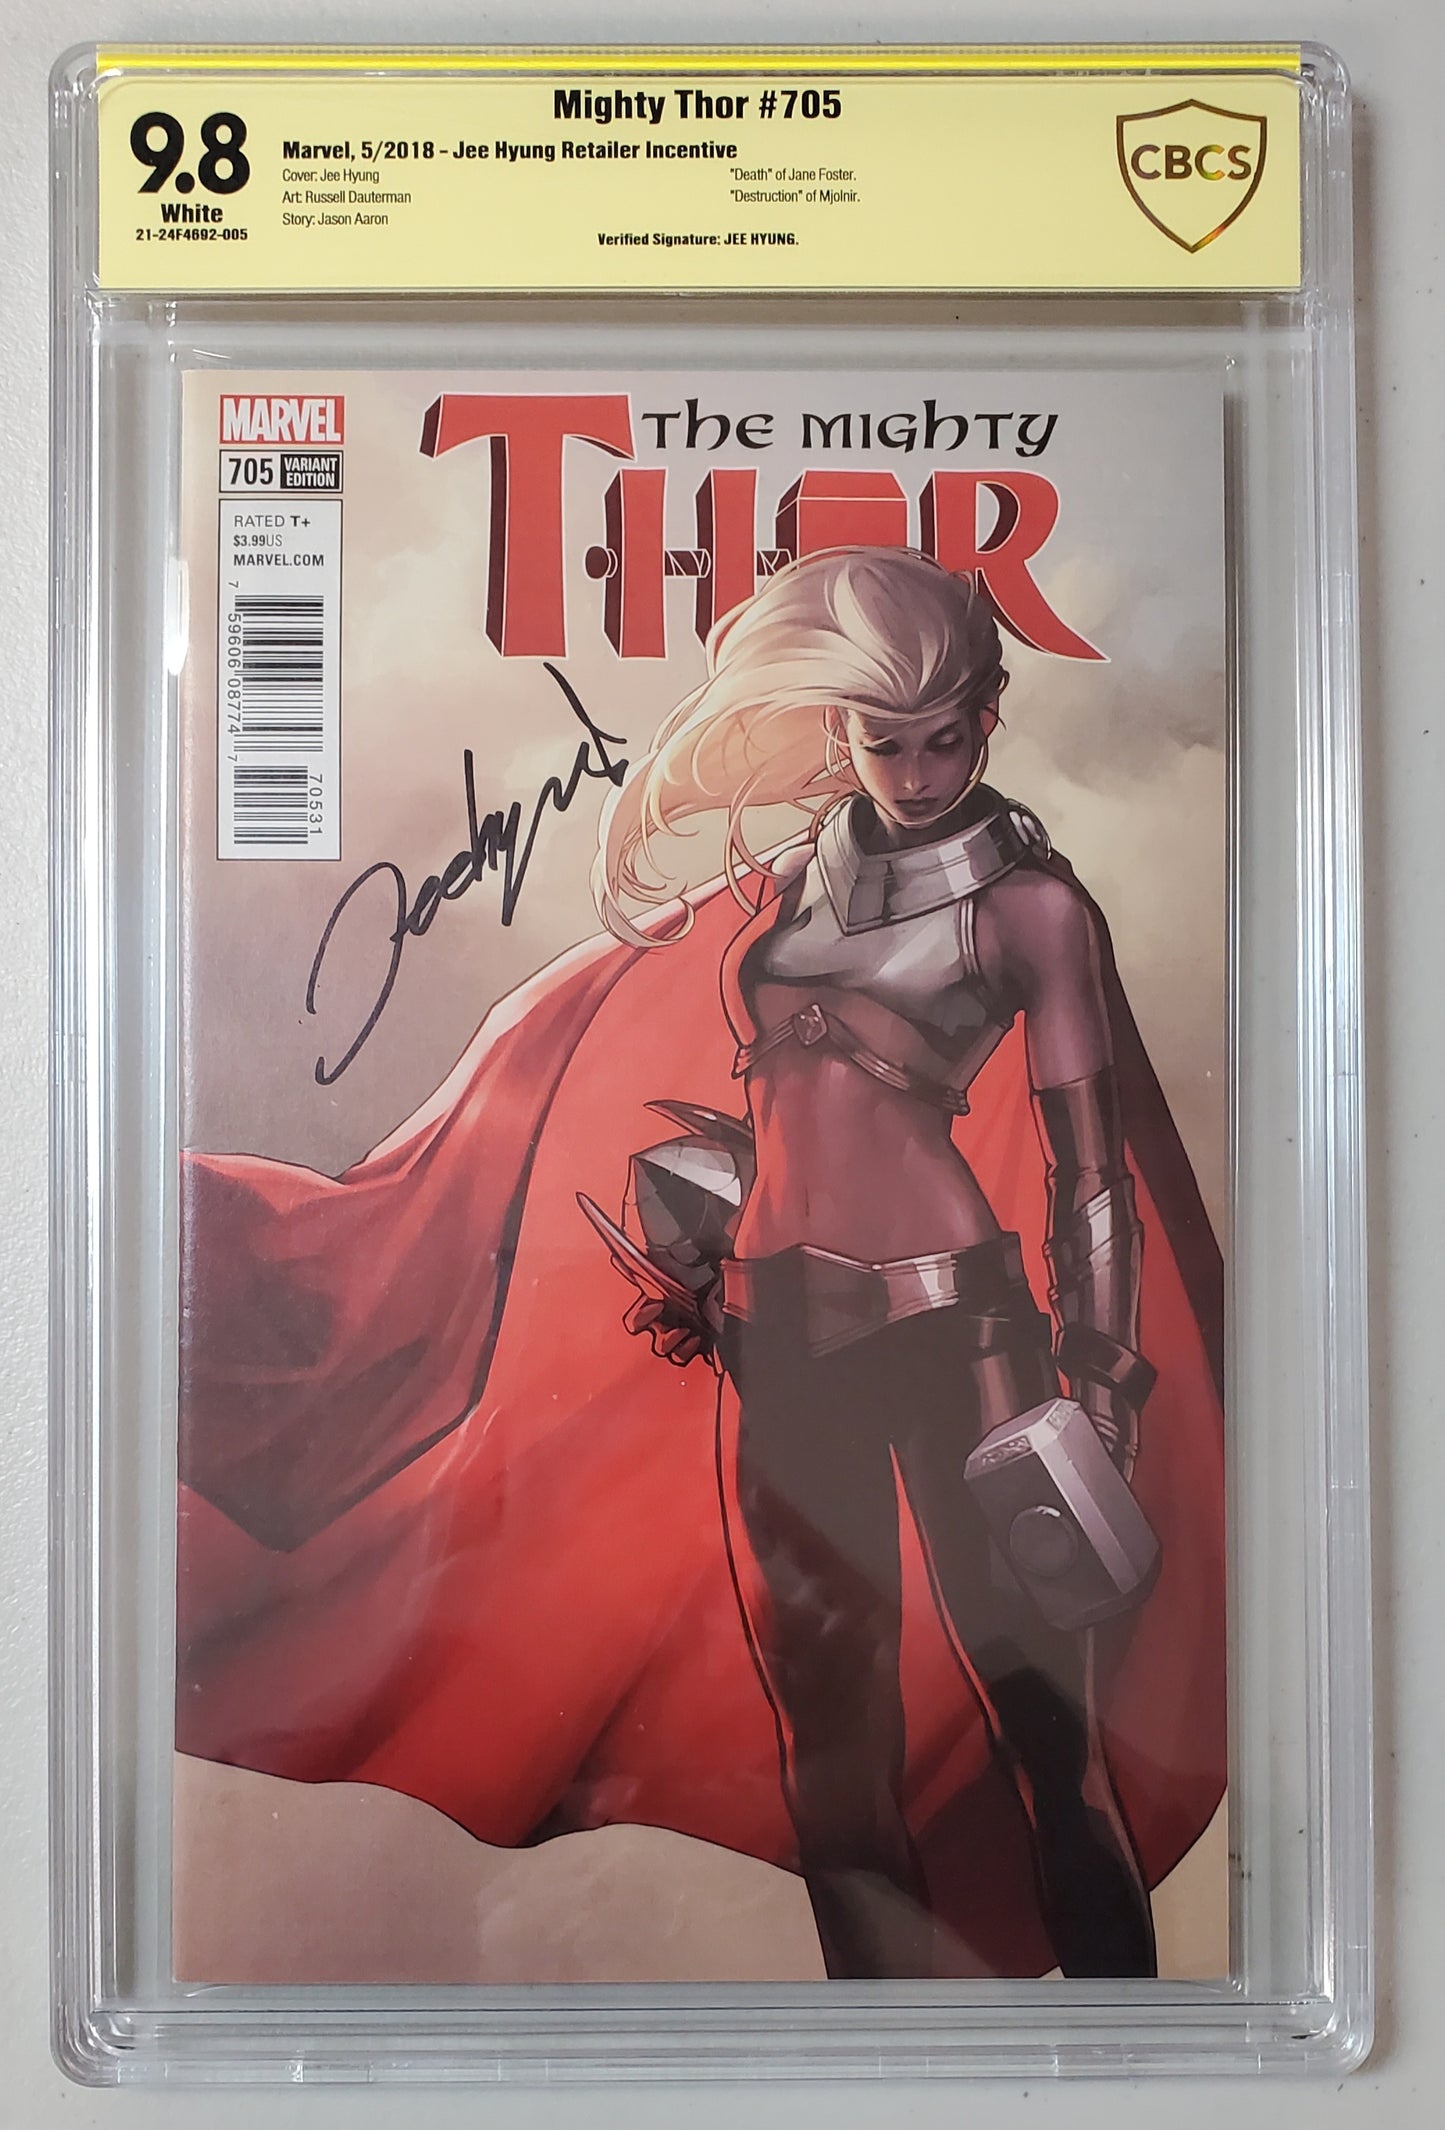 9.8 CBCS MIGHTY THOR #705 1:50 VARIANT SIGNED BY JEEHYUNG LEE